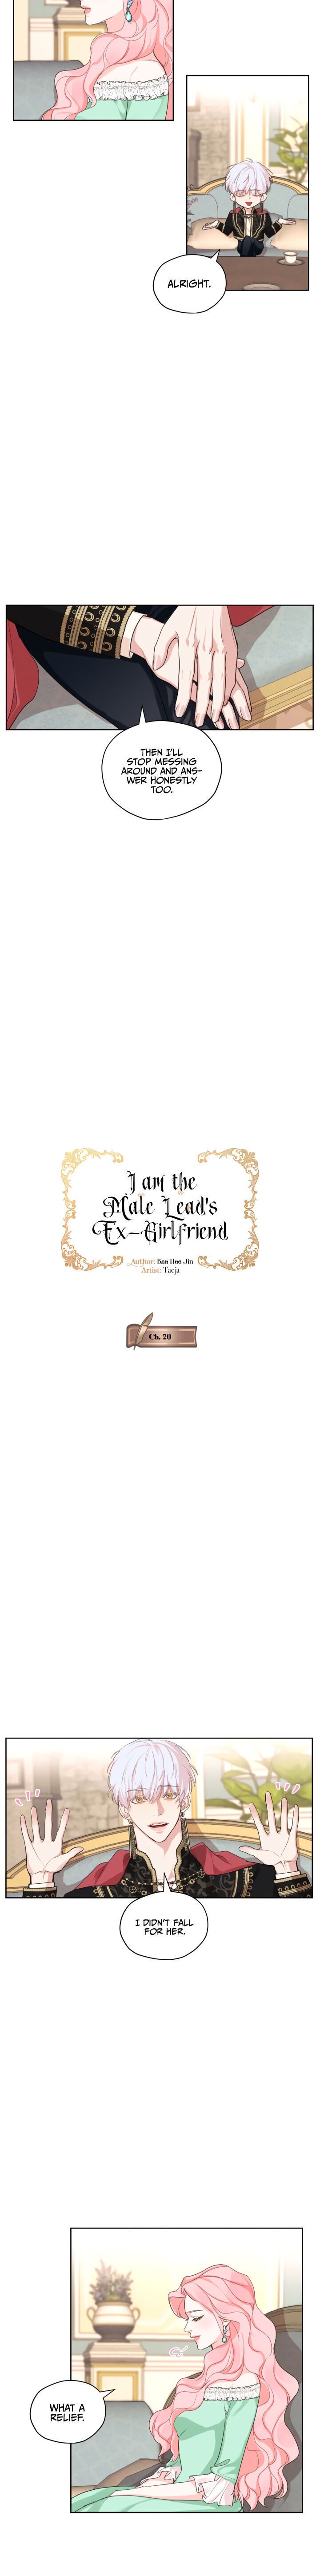 I am the Male Lead’s Ex-Girlfriend Chapter 20 page 3